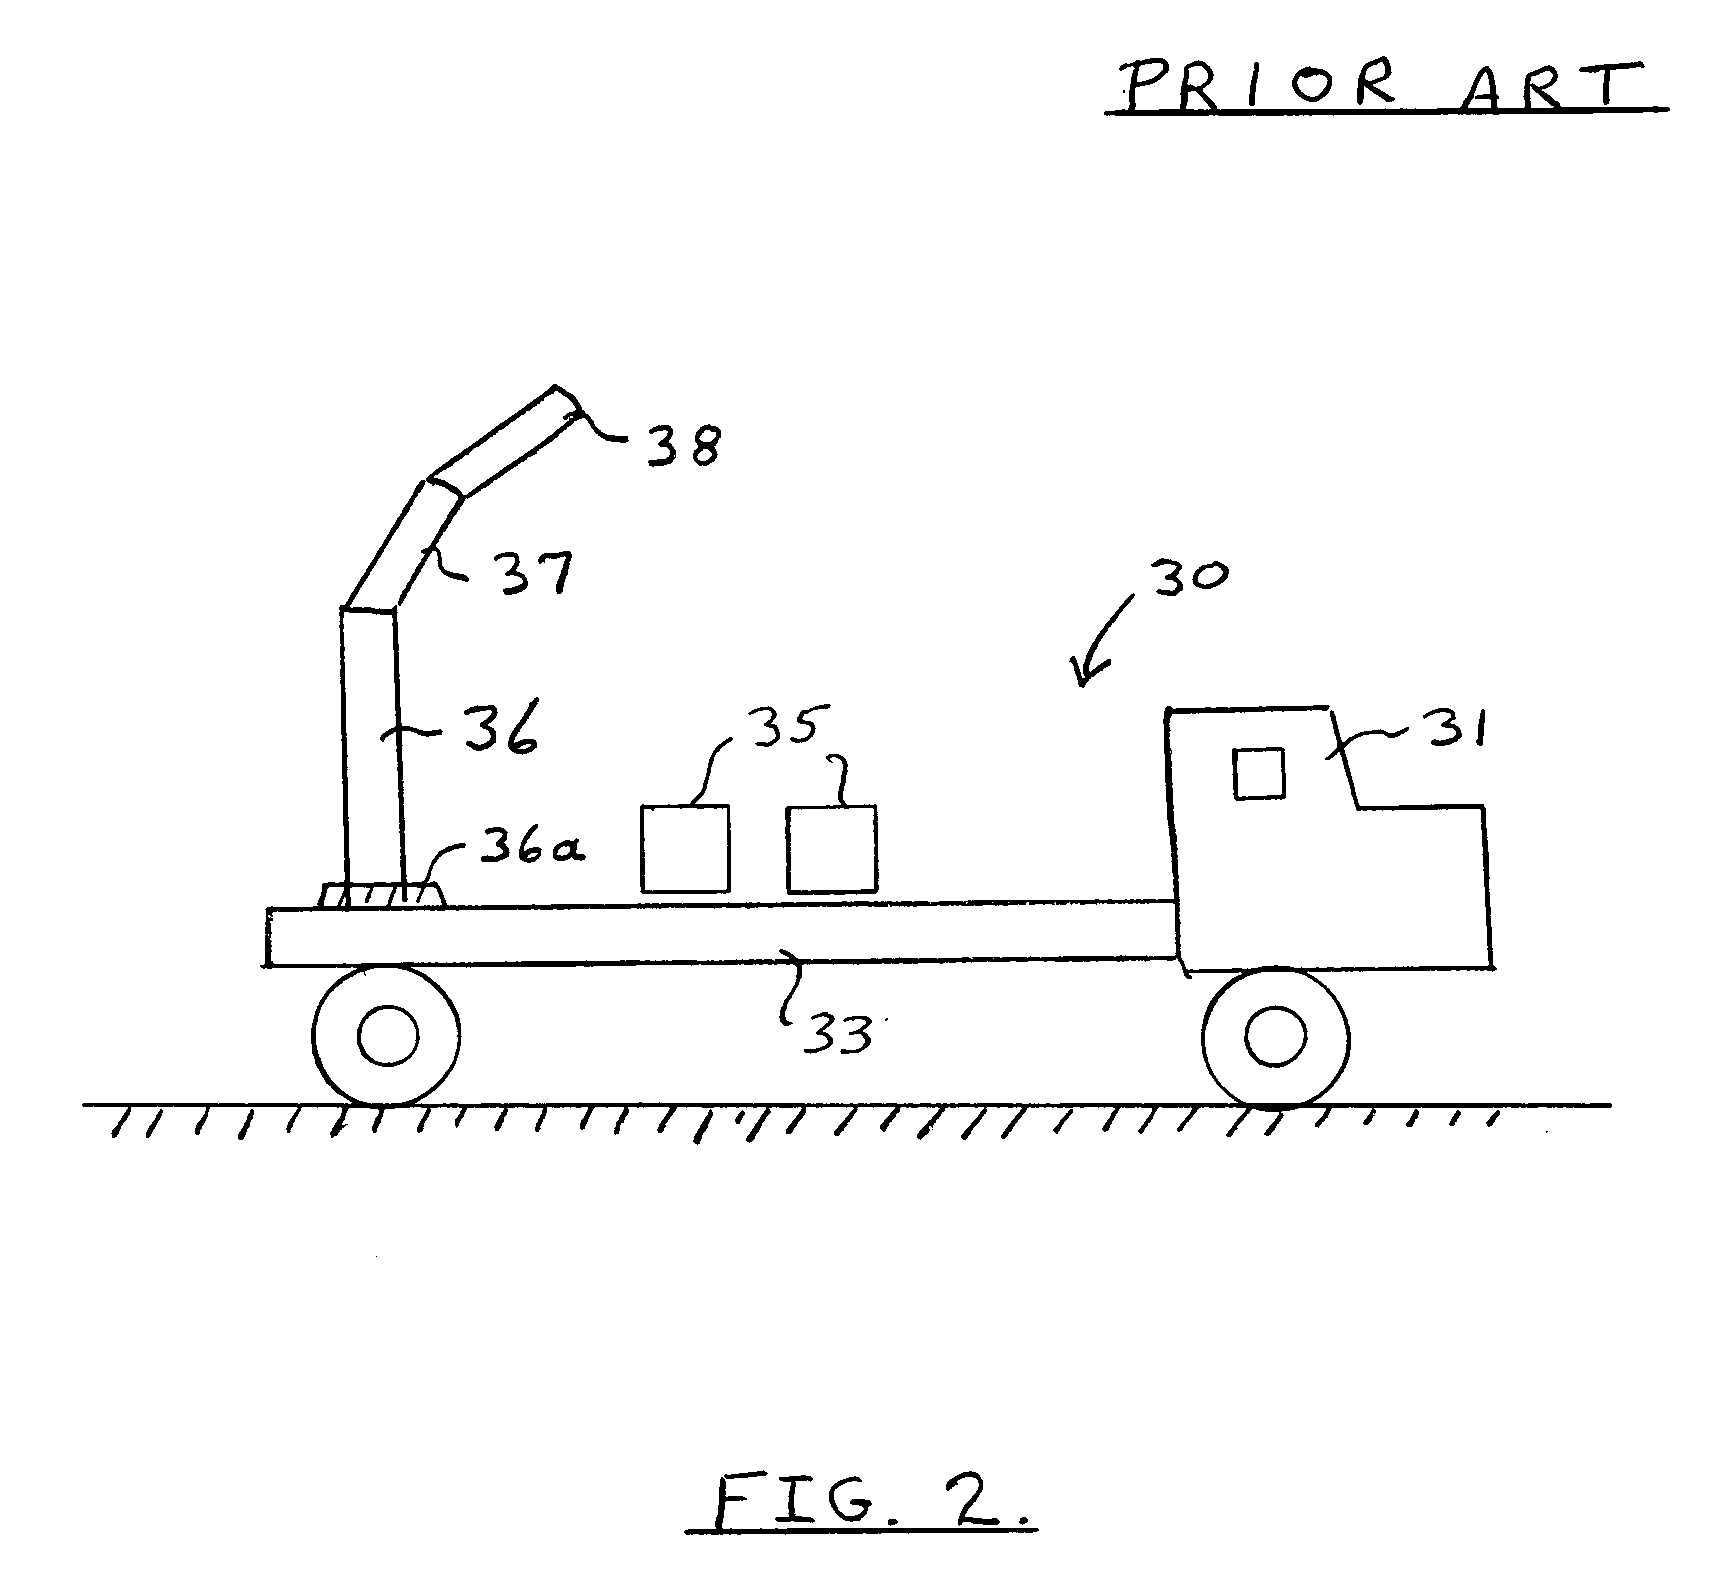 Flat-bed truck with crane, lift or hoist